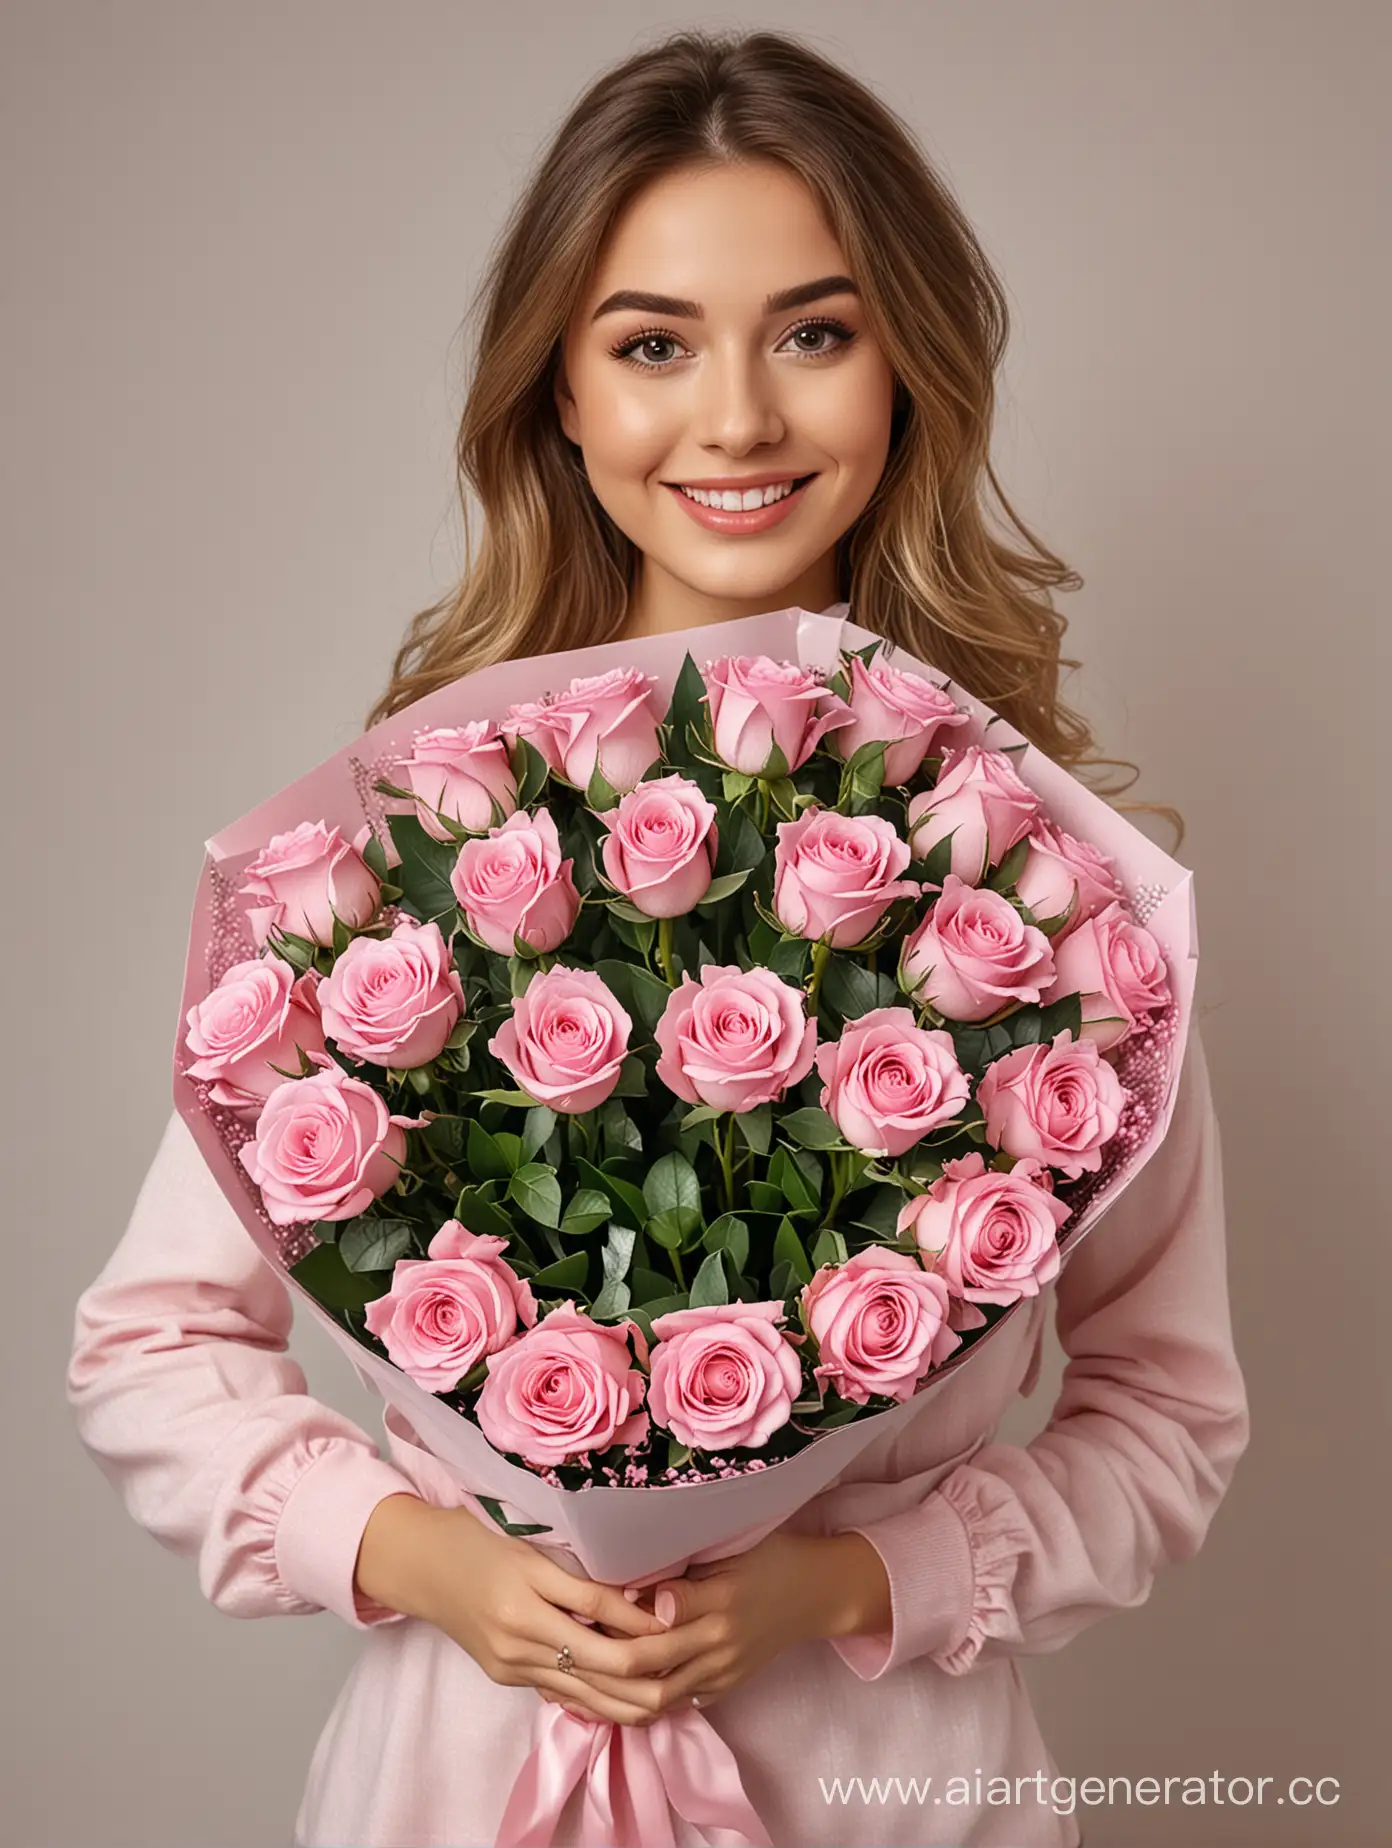 Happy-Girl-Holding-Luxurious-Pink-Rose-Bouquet